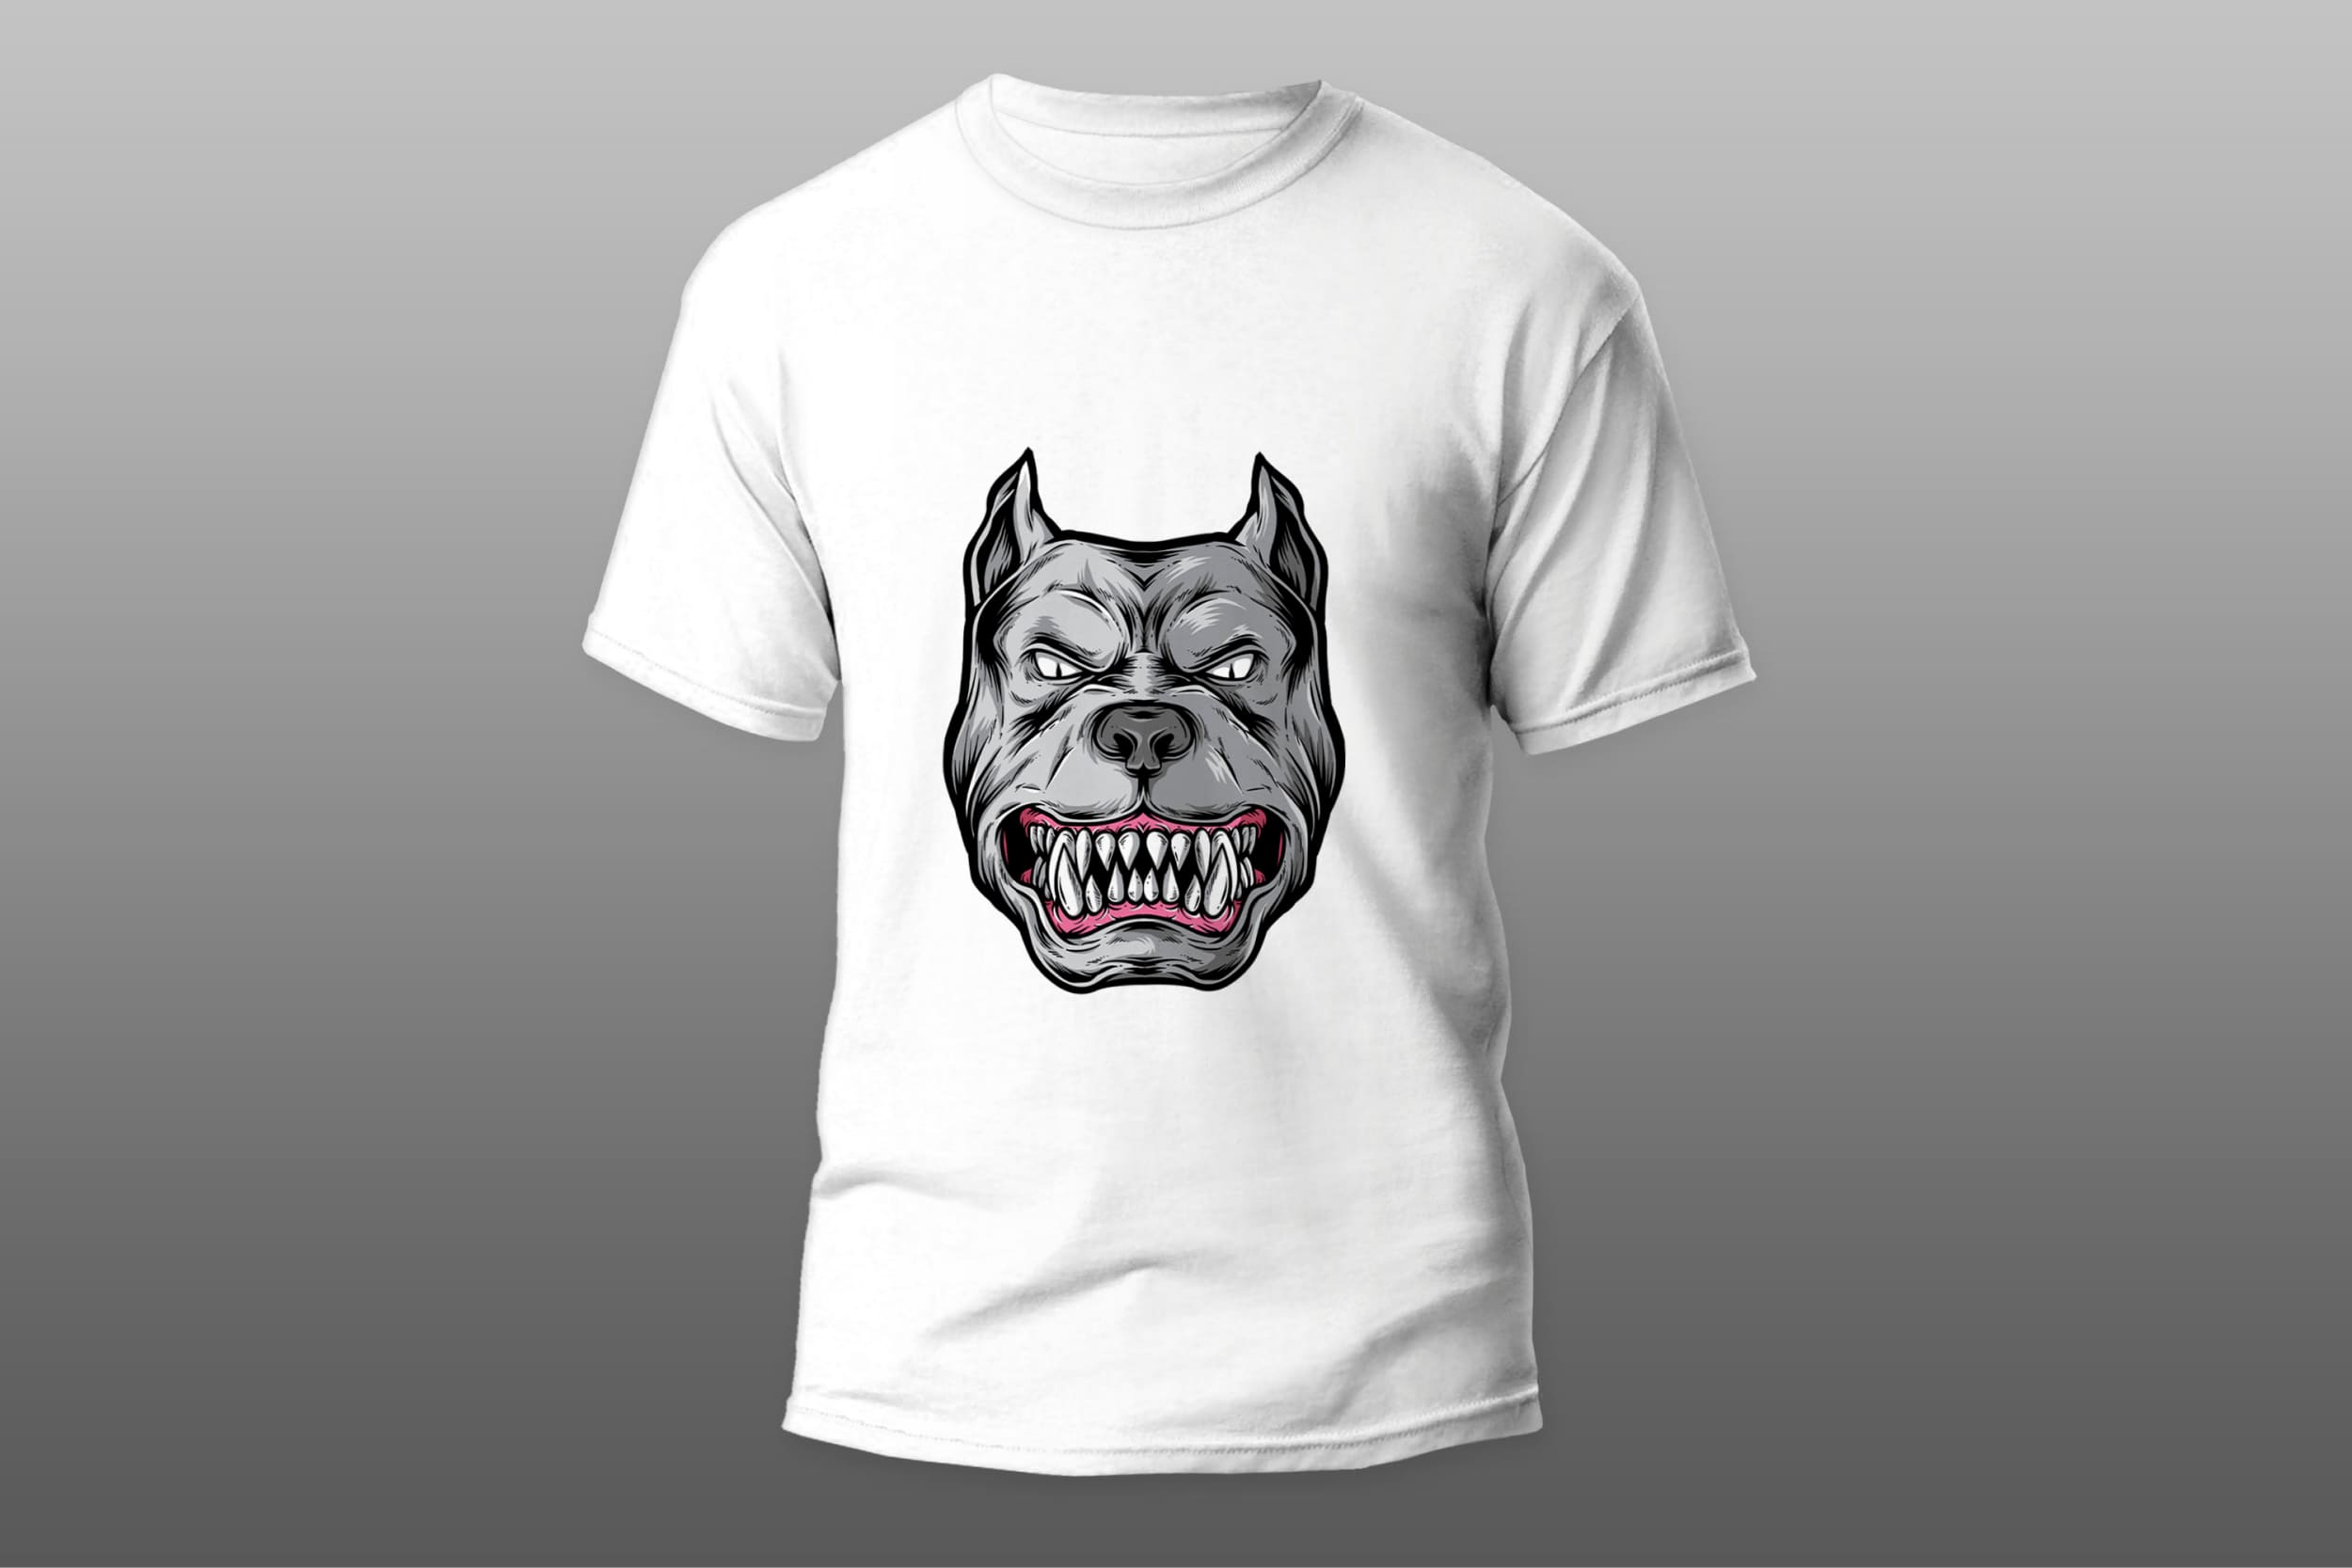 White T-shirt with a gray angry pitbull face on a gray gradient background.